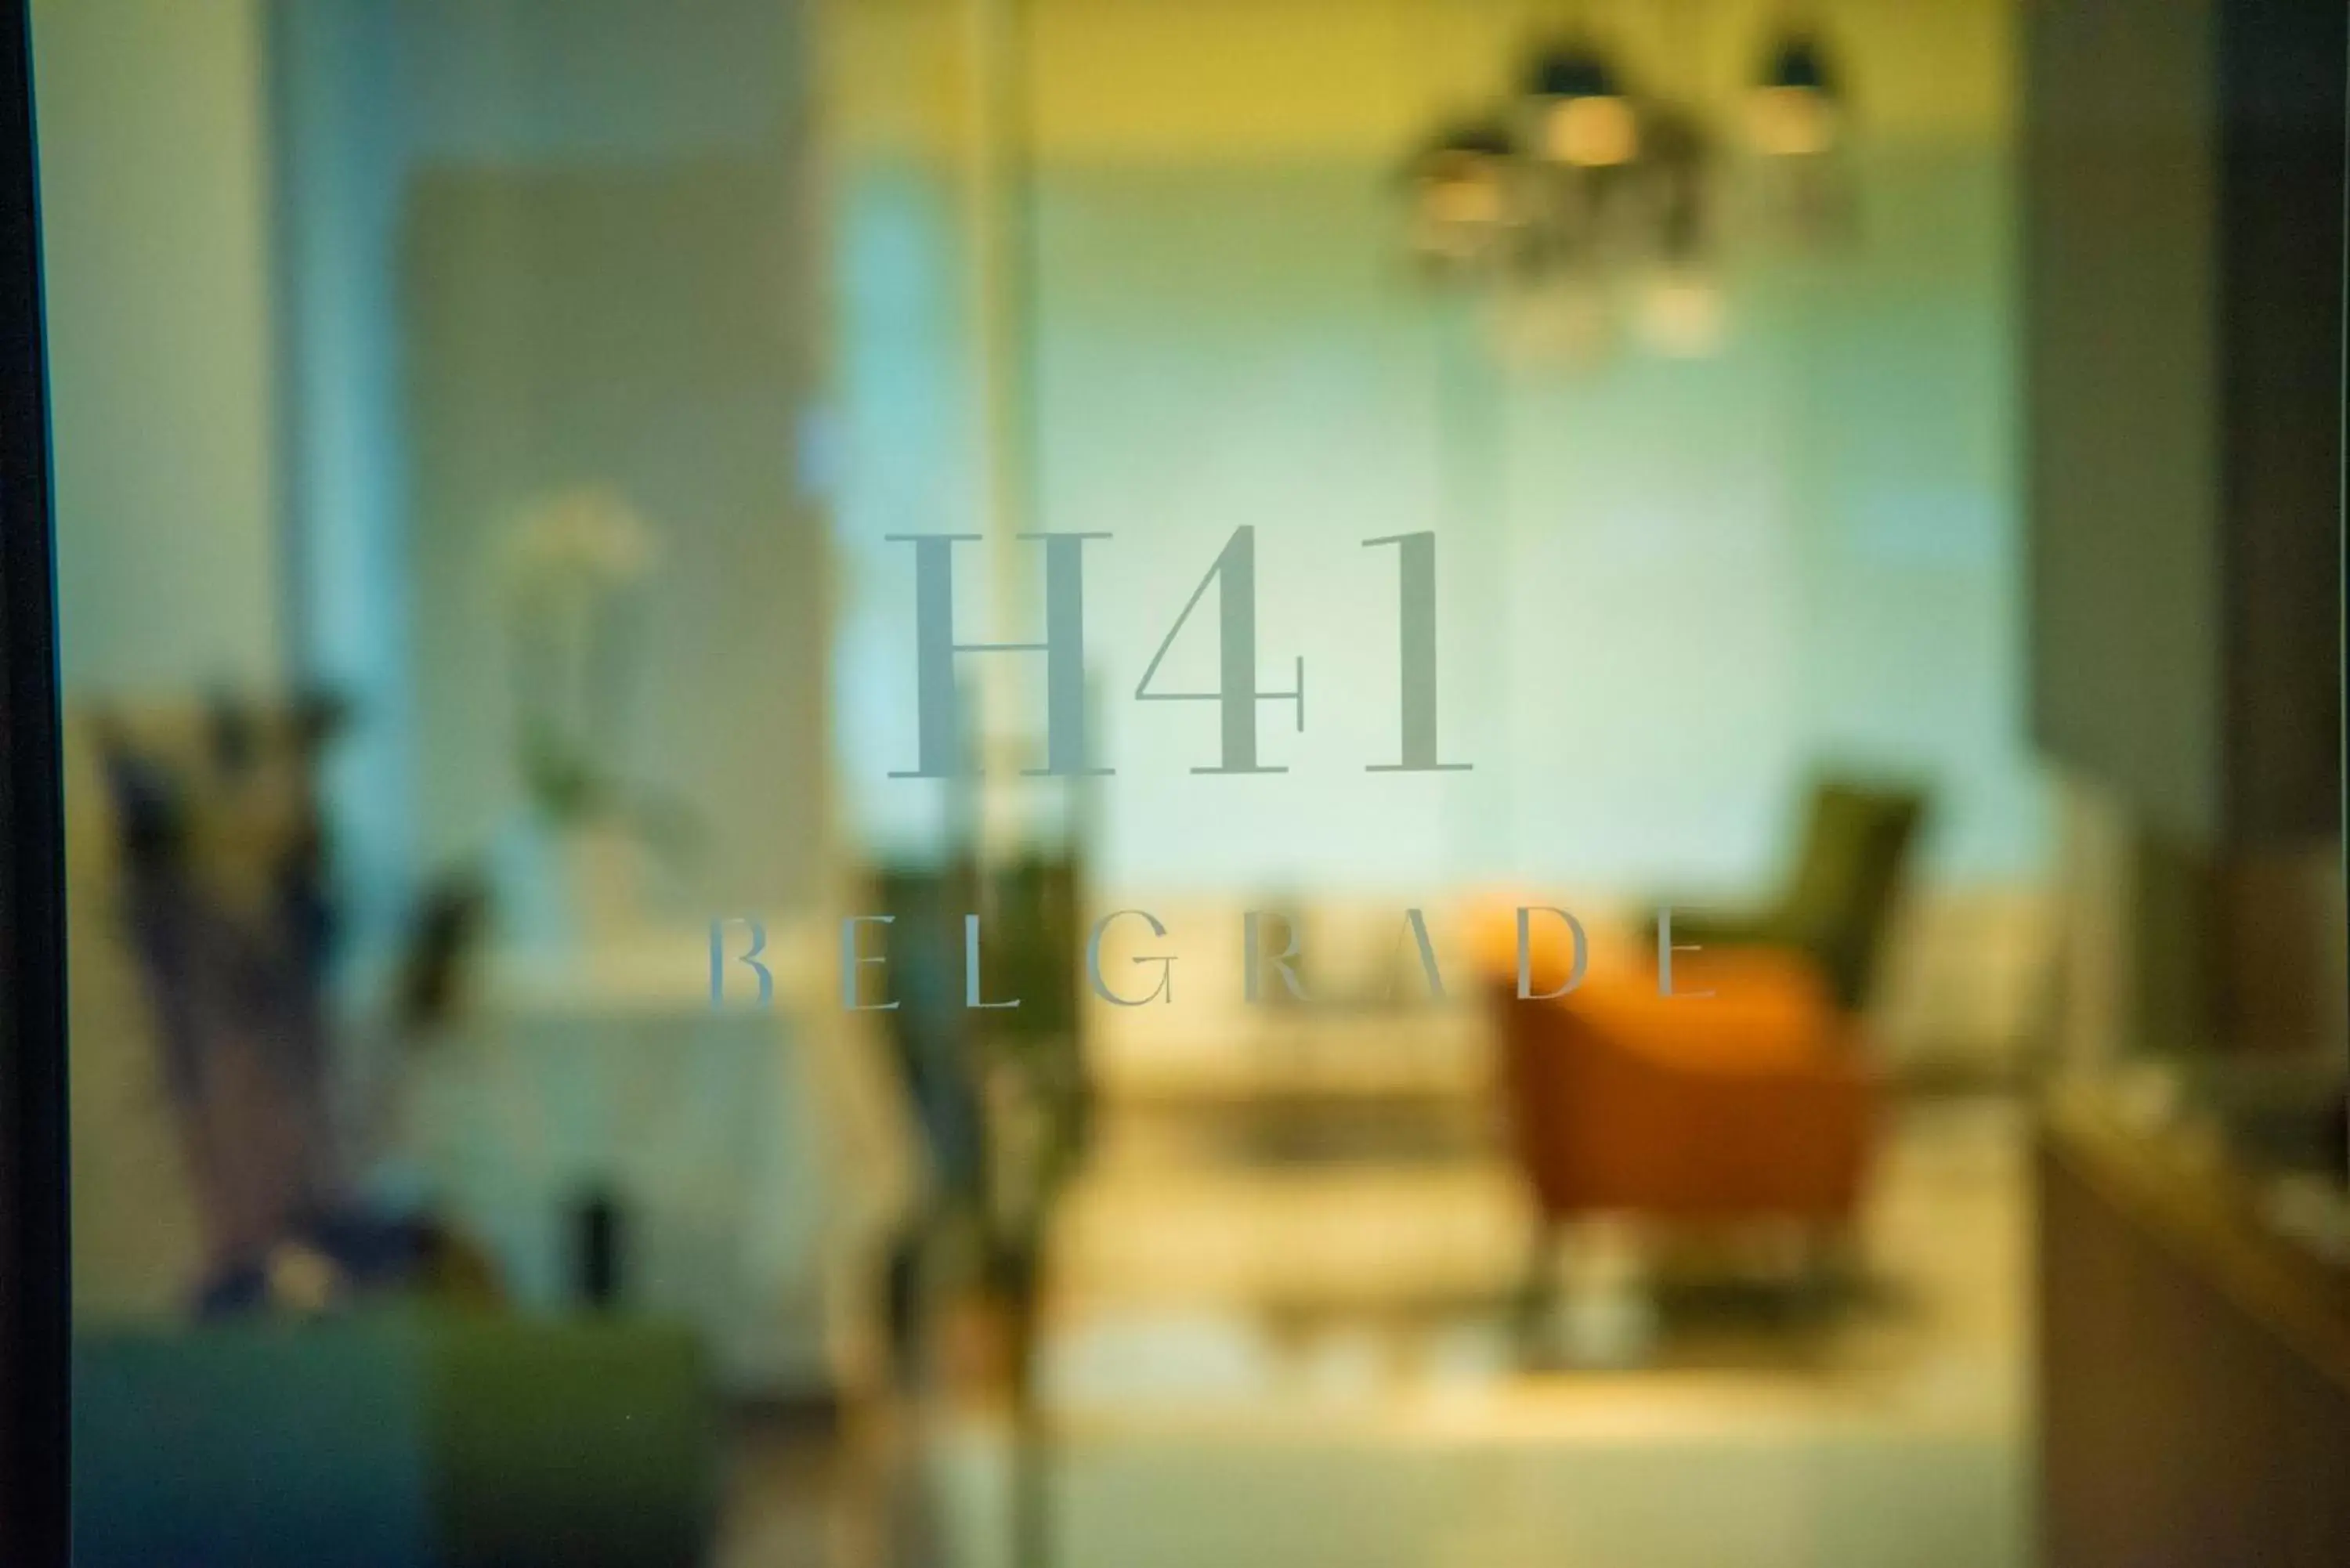 Property logo or sign in H41 Luxury Suites